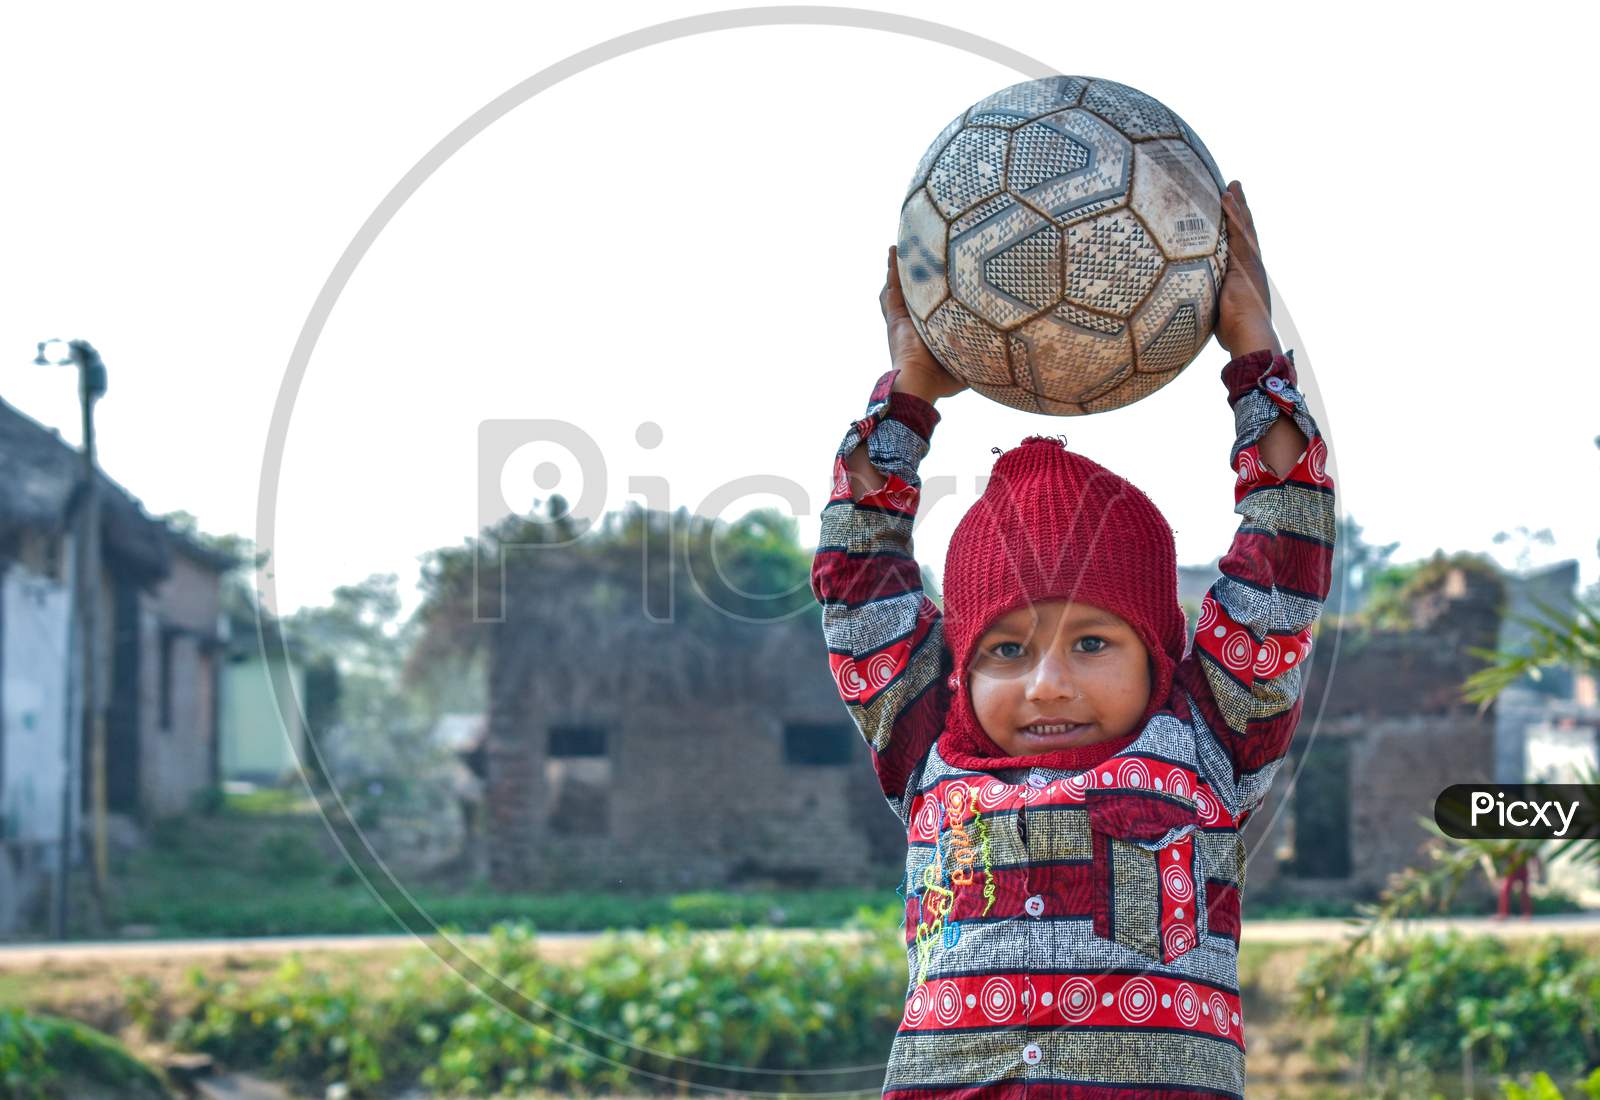 A 4-year-old poor child of a village is playing with a football